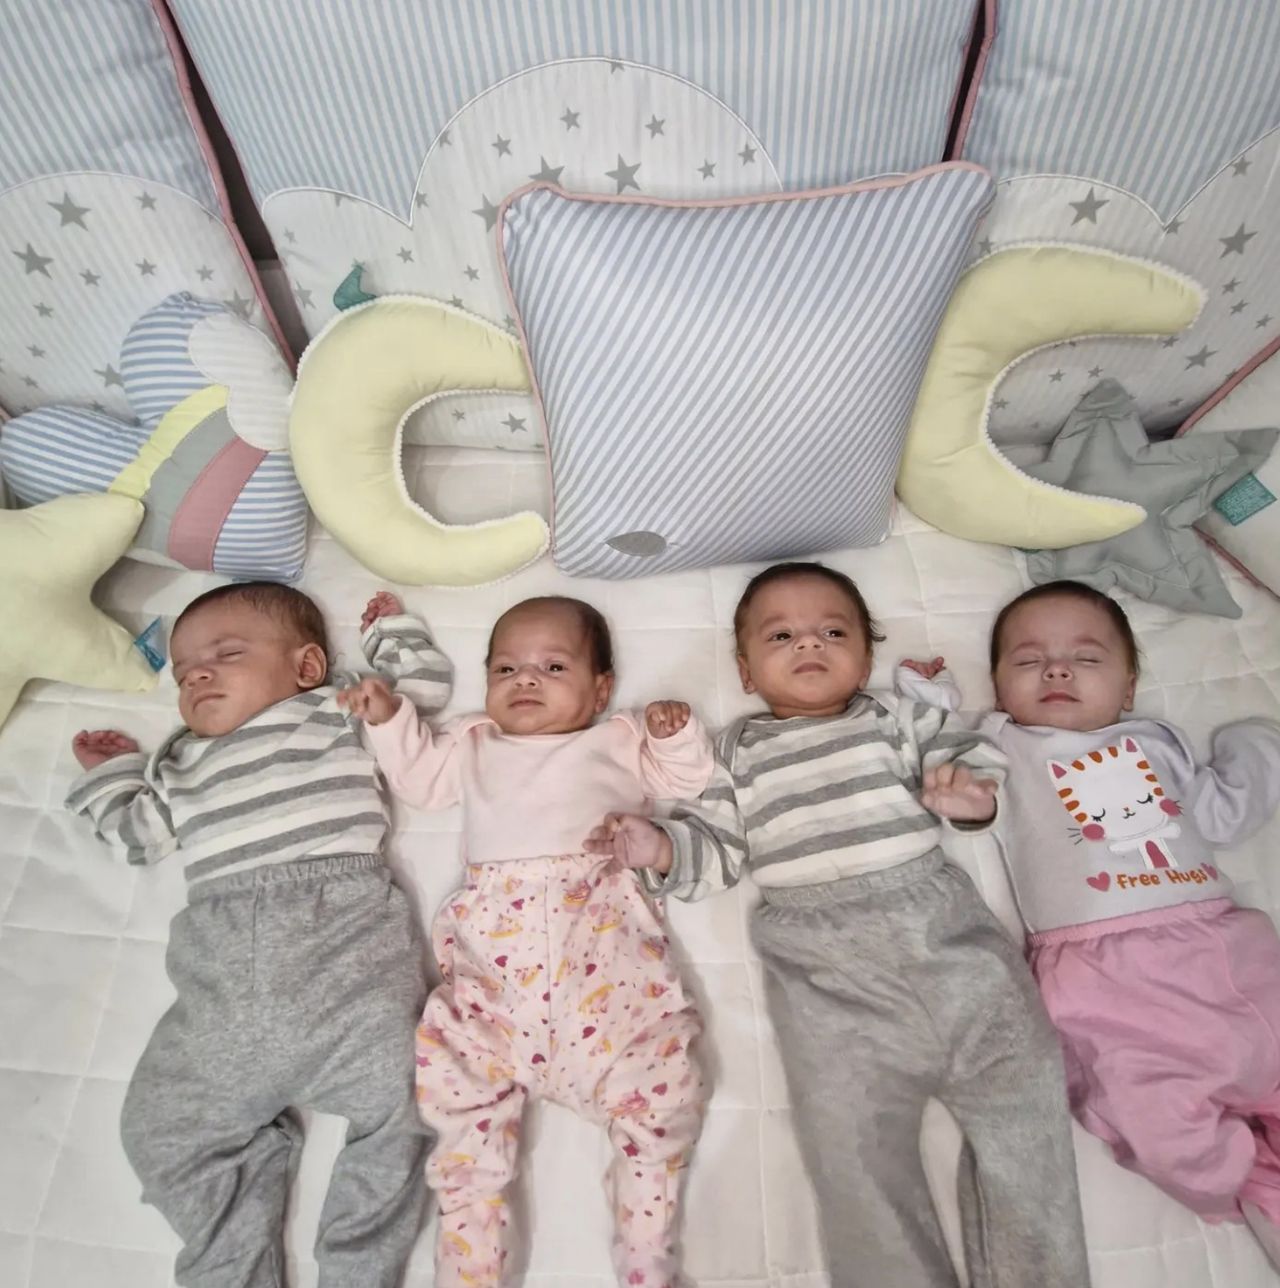 A woman gave birth to sextuplets